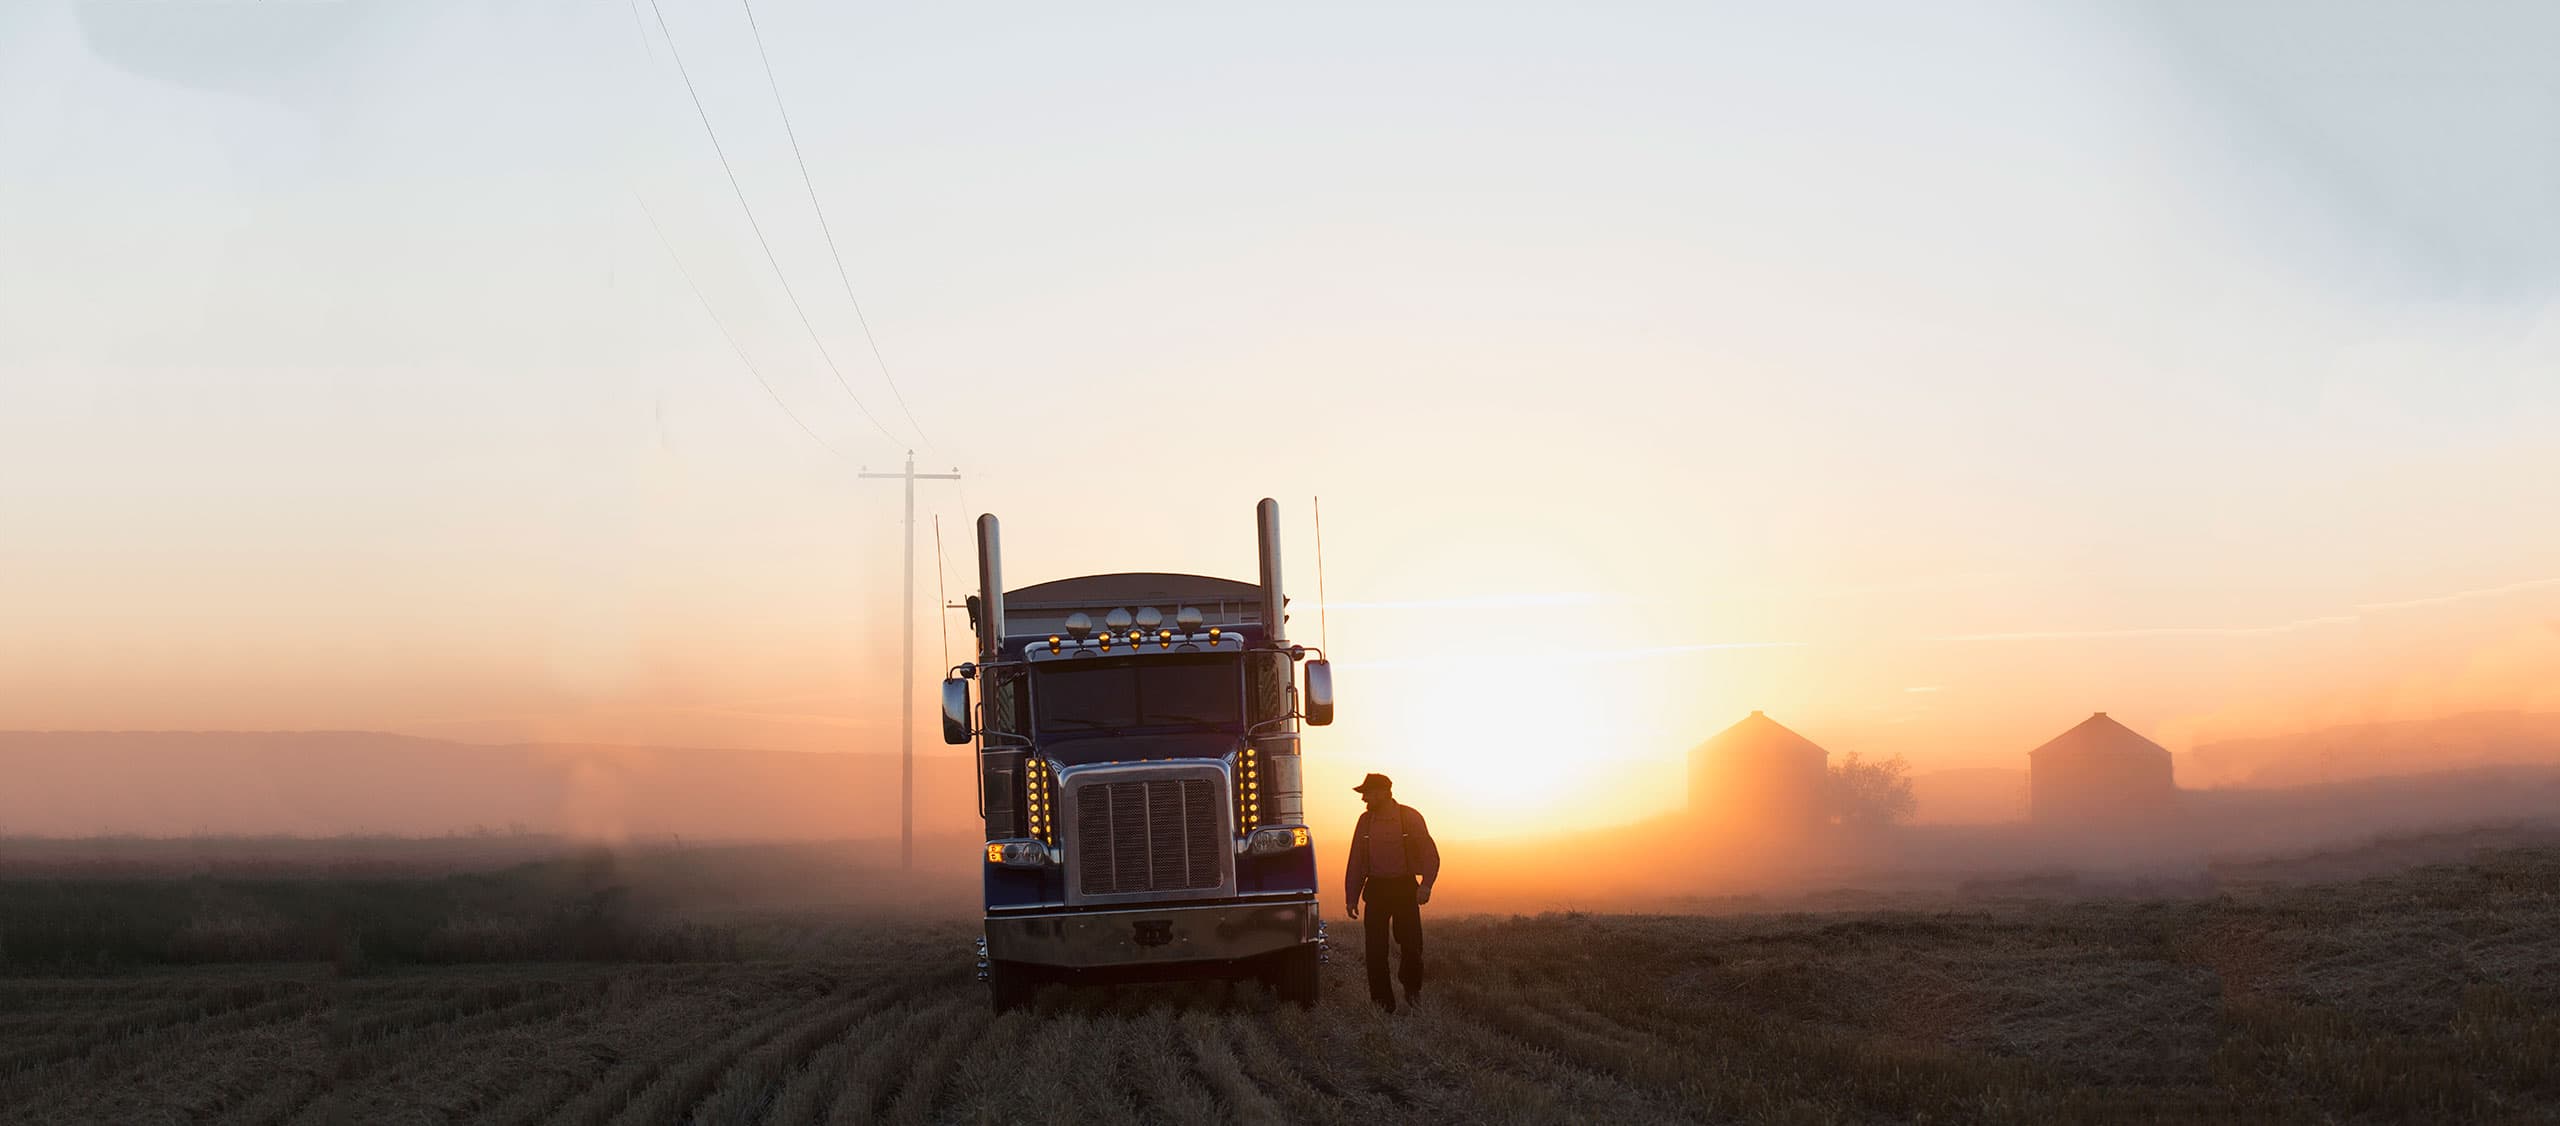 Rig and driver at dusk in a field.